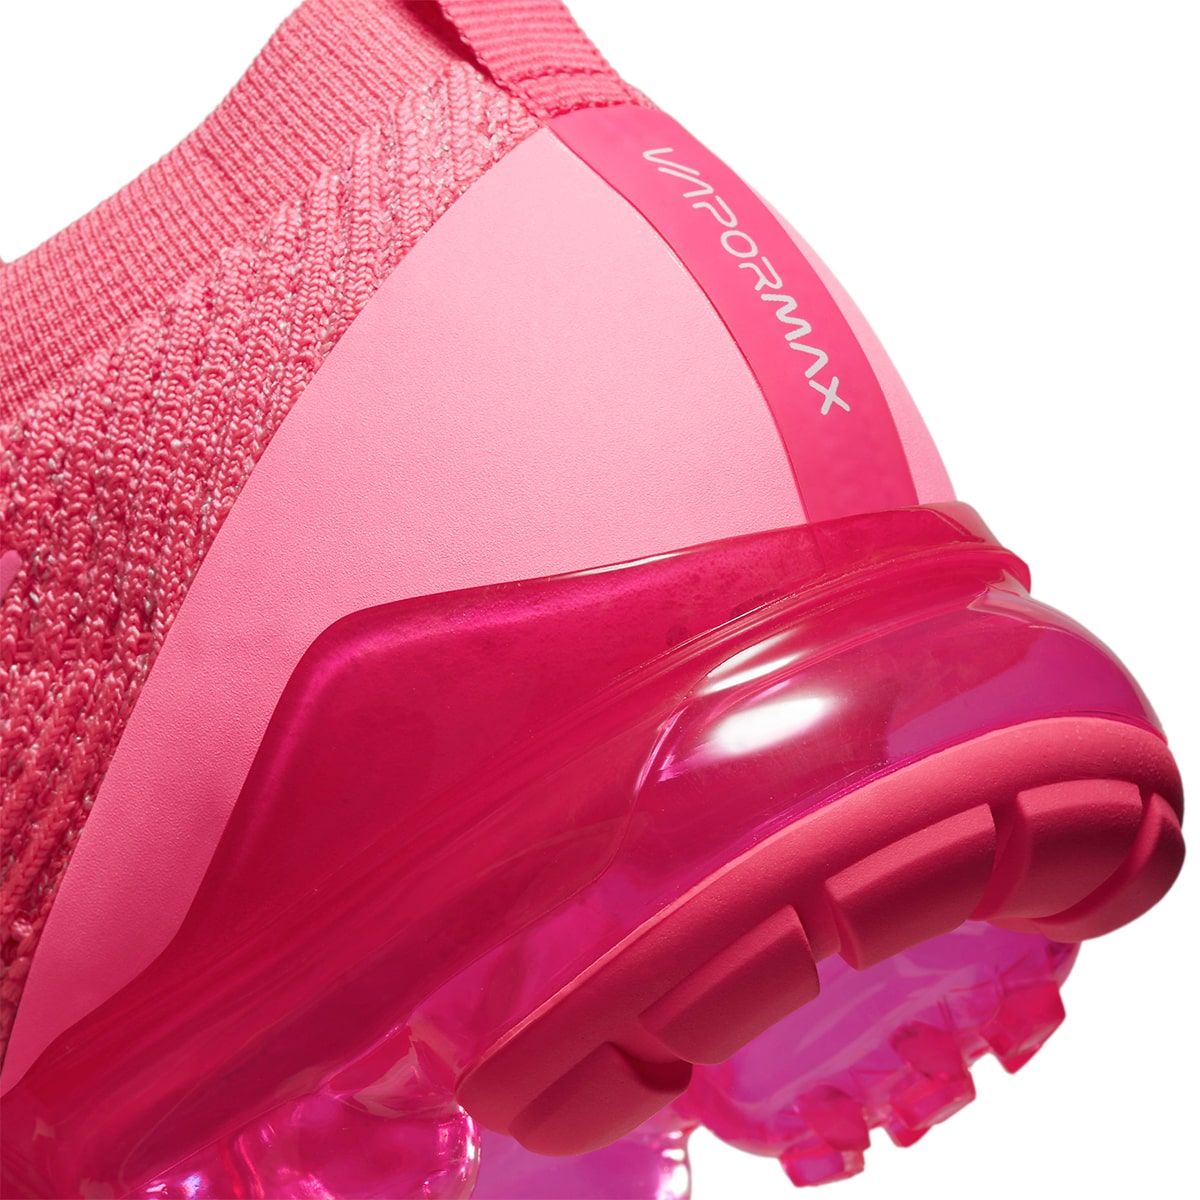 Available Now // Nike Air VaporMax 3.0 "Hyper Pink" HOUSE OF HEAT